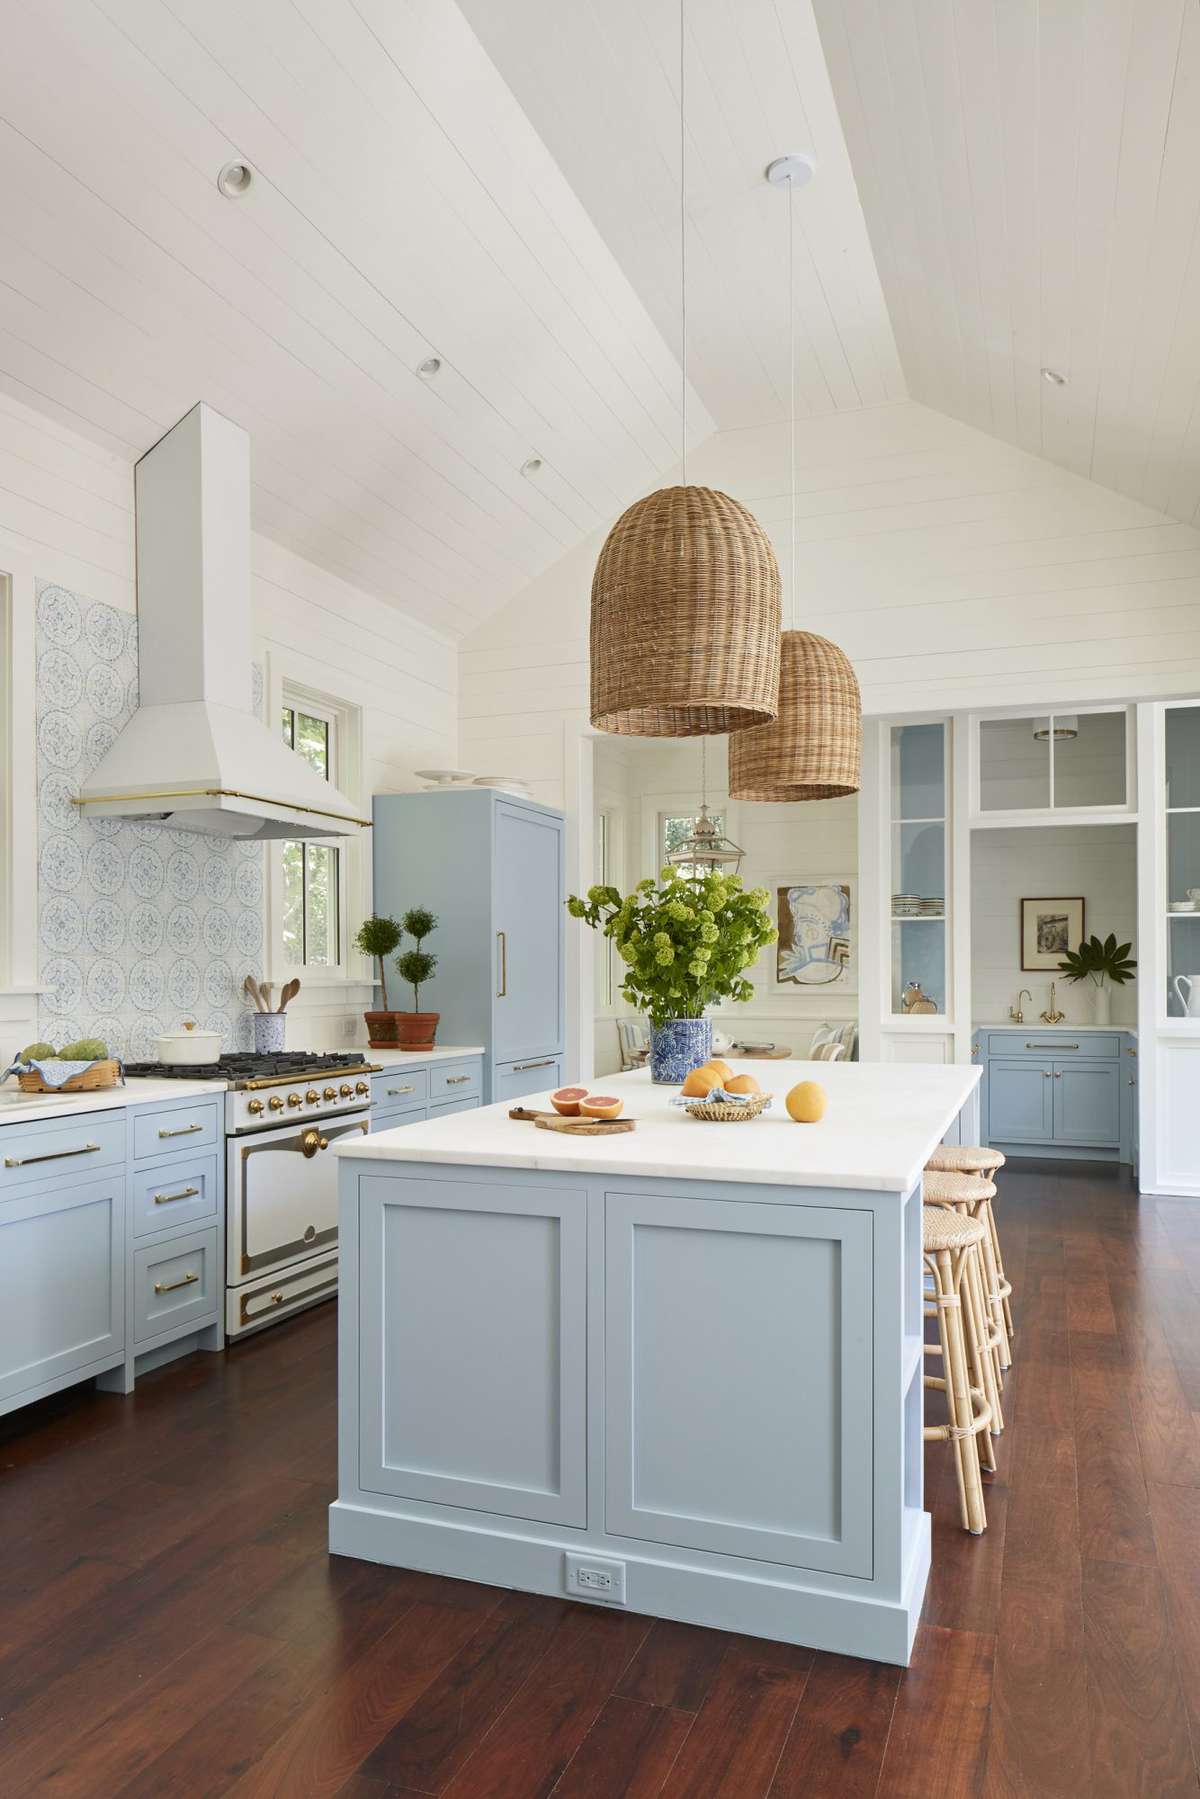 7 Paint Colors We Re Loving For Kitchen Cabinets In 2021 Southern Living